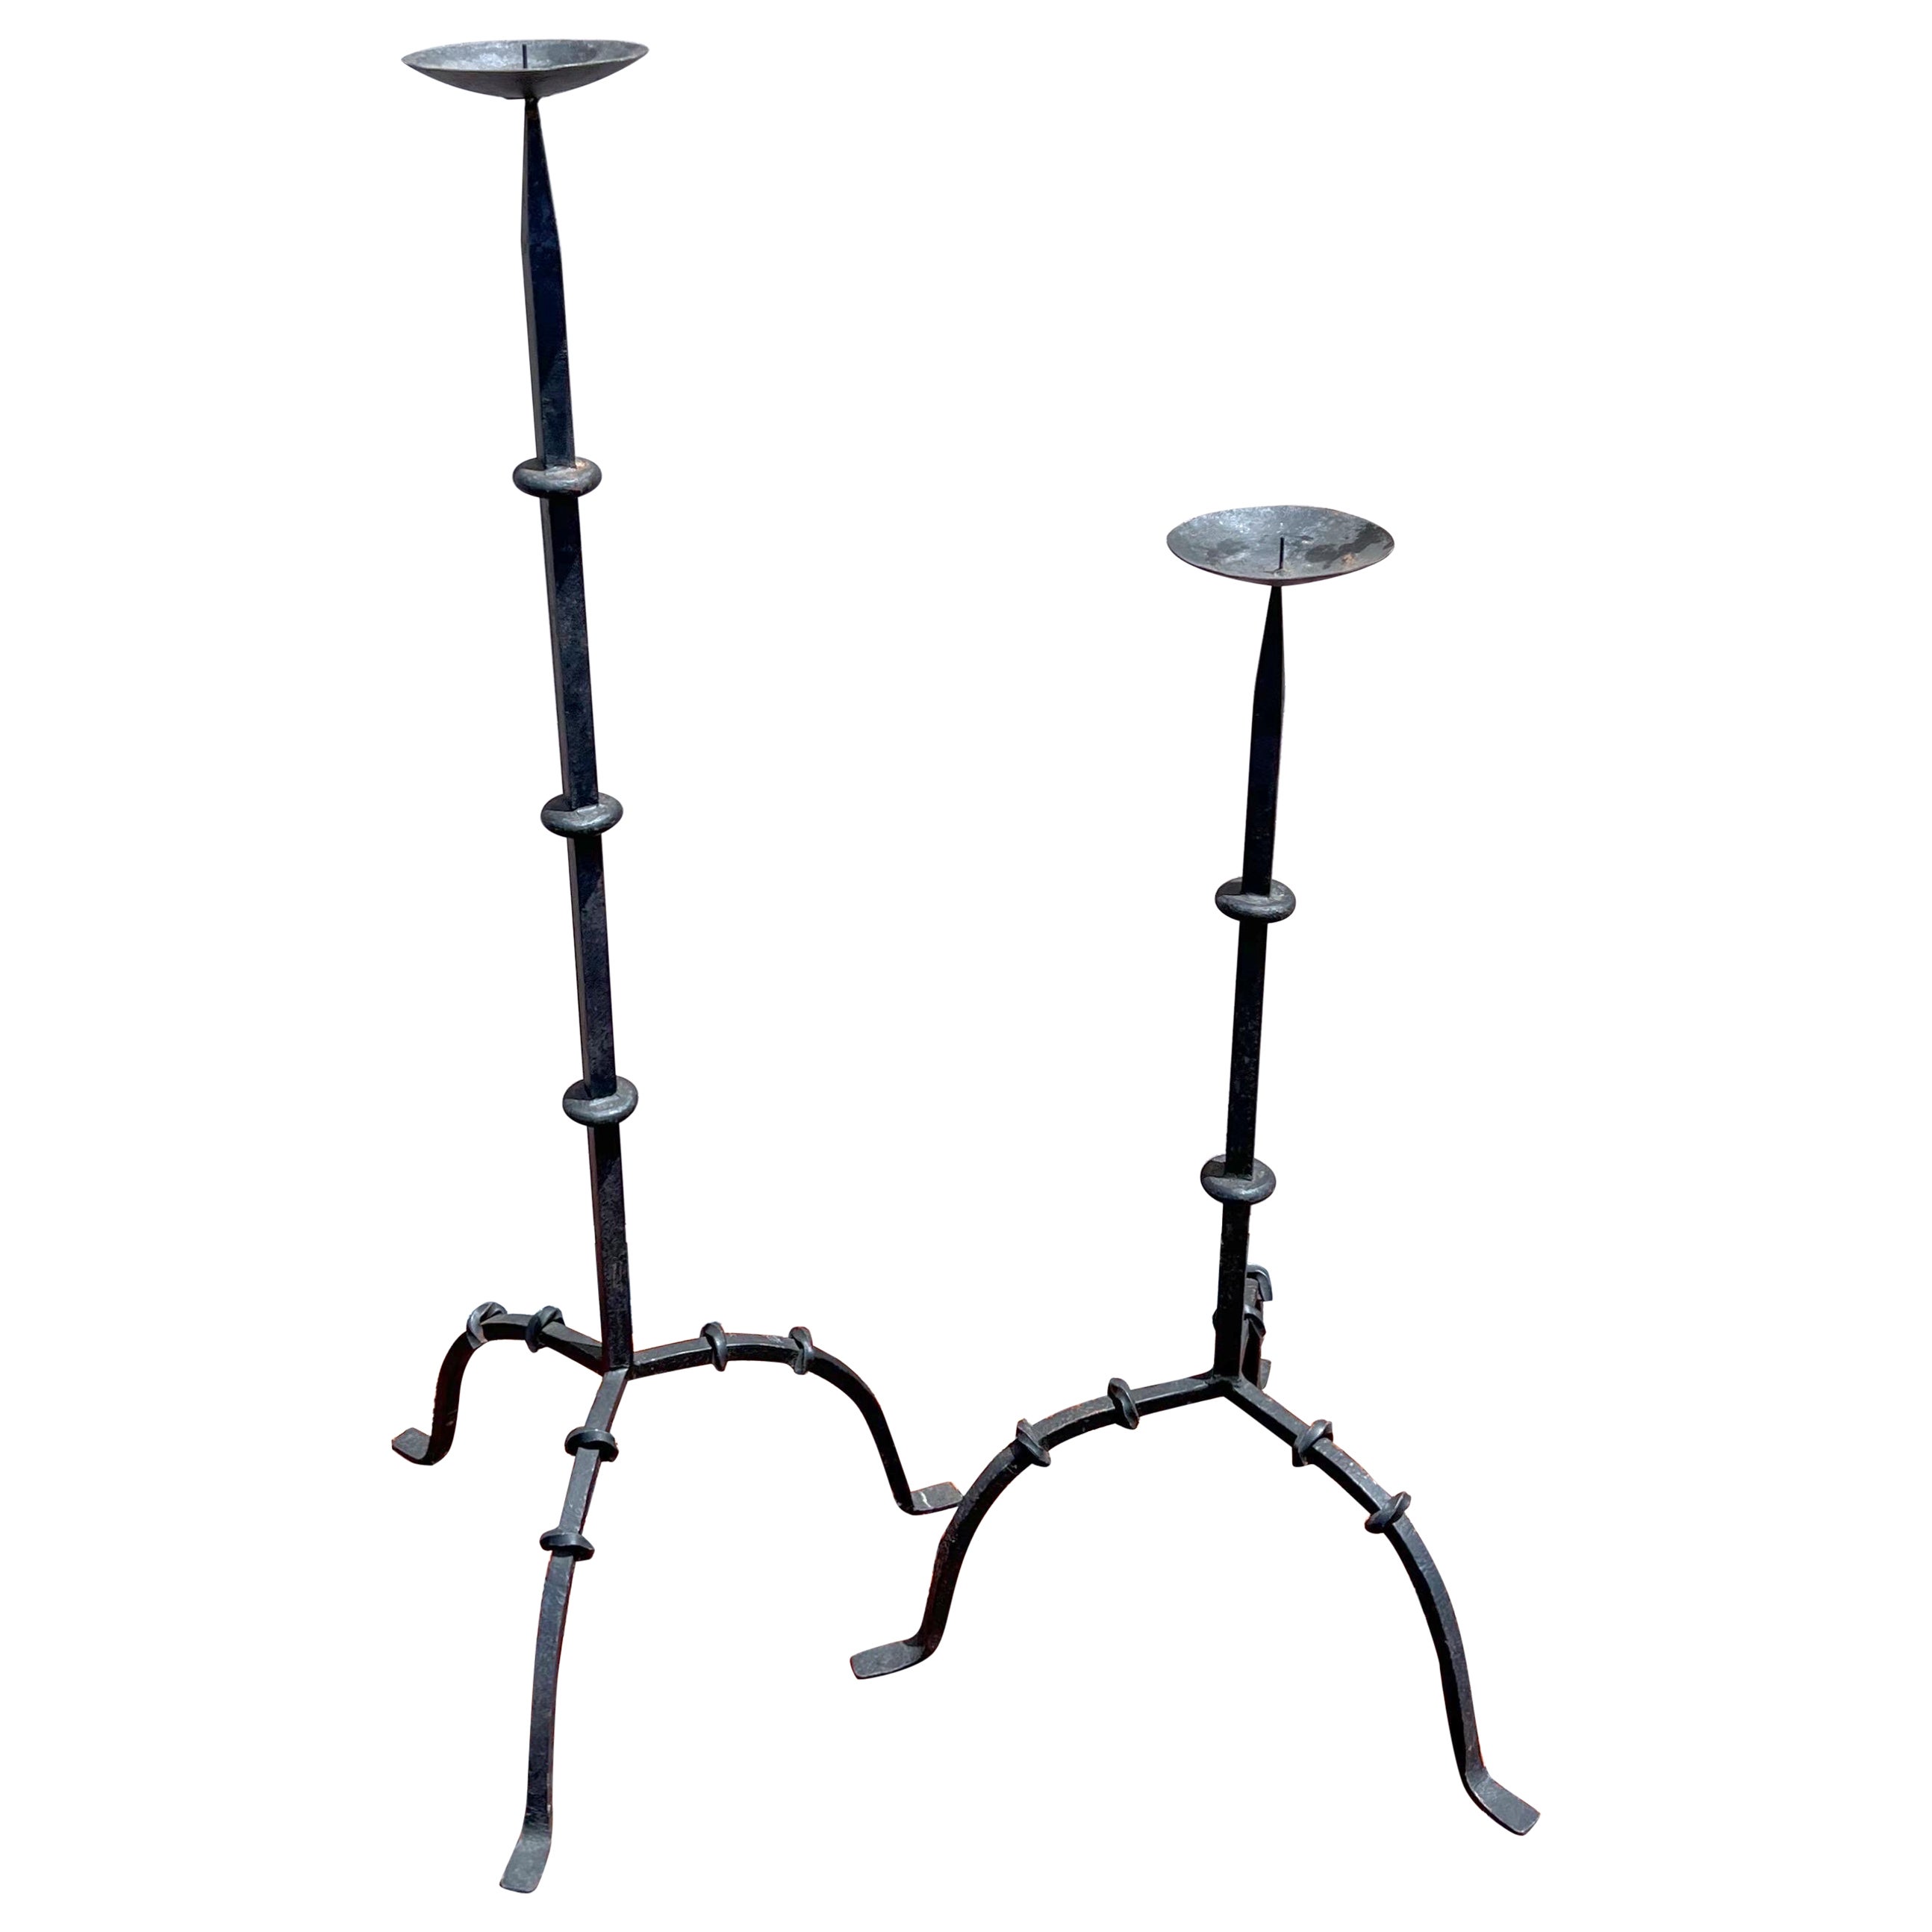 Antique Handwrought Iron Candle Stands - a Pair